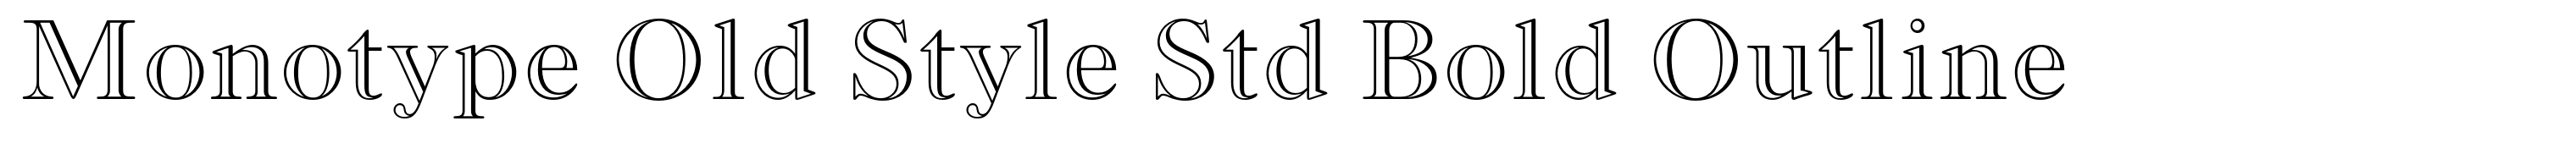 Monotype Old Style Std Bold Outline